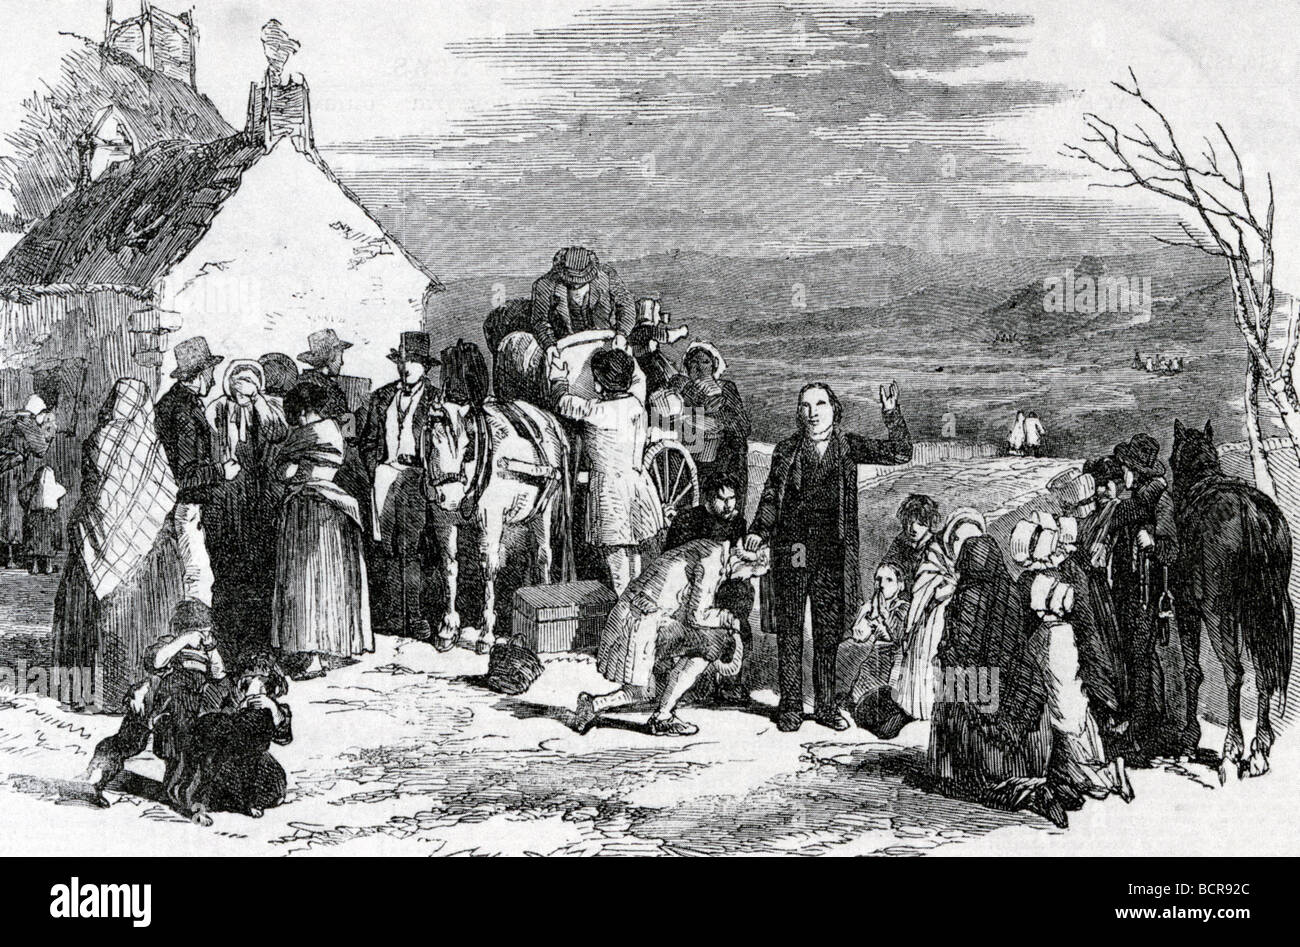 IRELAND EMIGRATION - A priest gives his blessing as a poor family prepare to leave their home and emigrate to America in 1845 Stock Photo